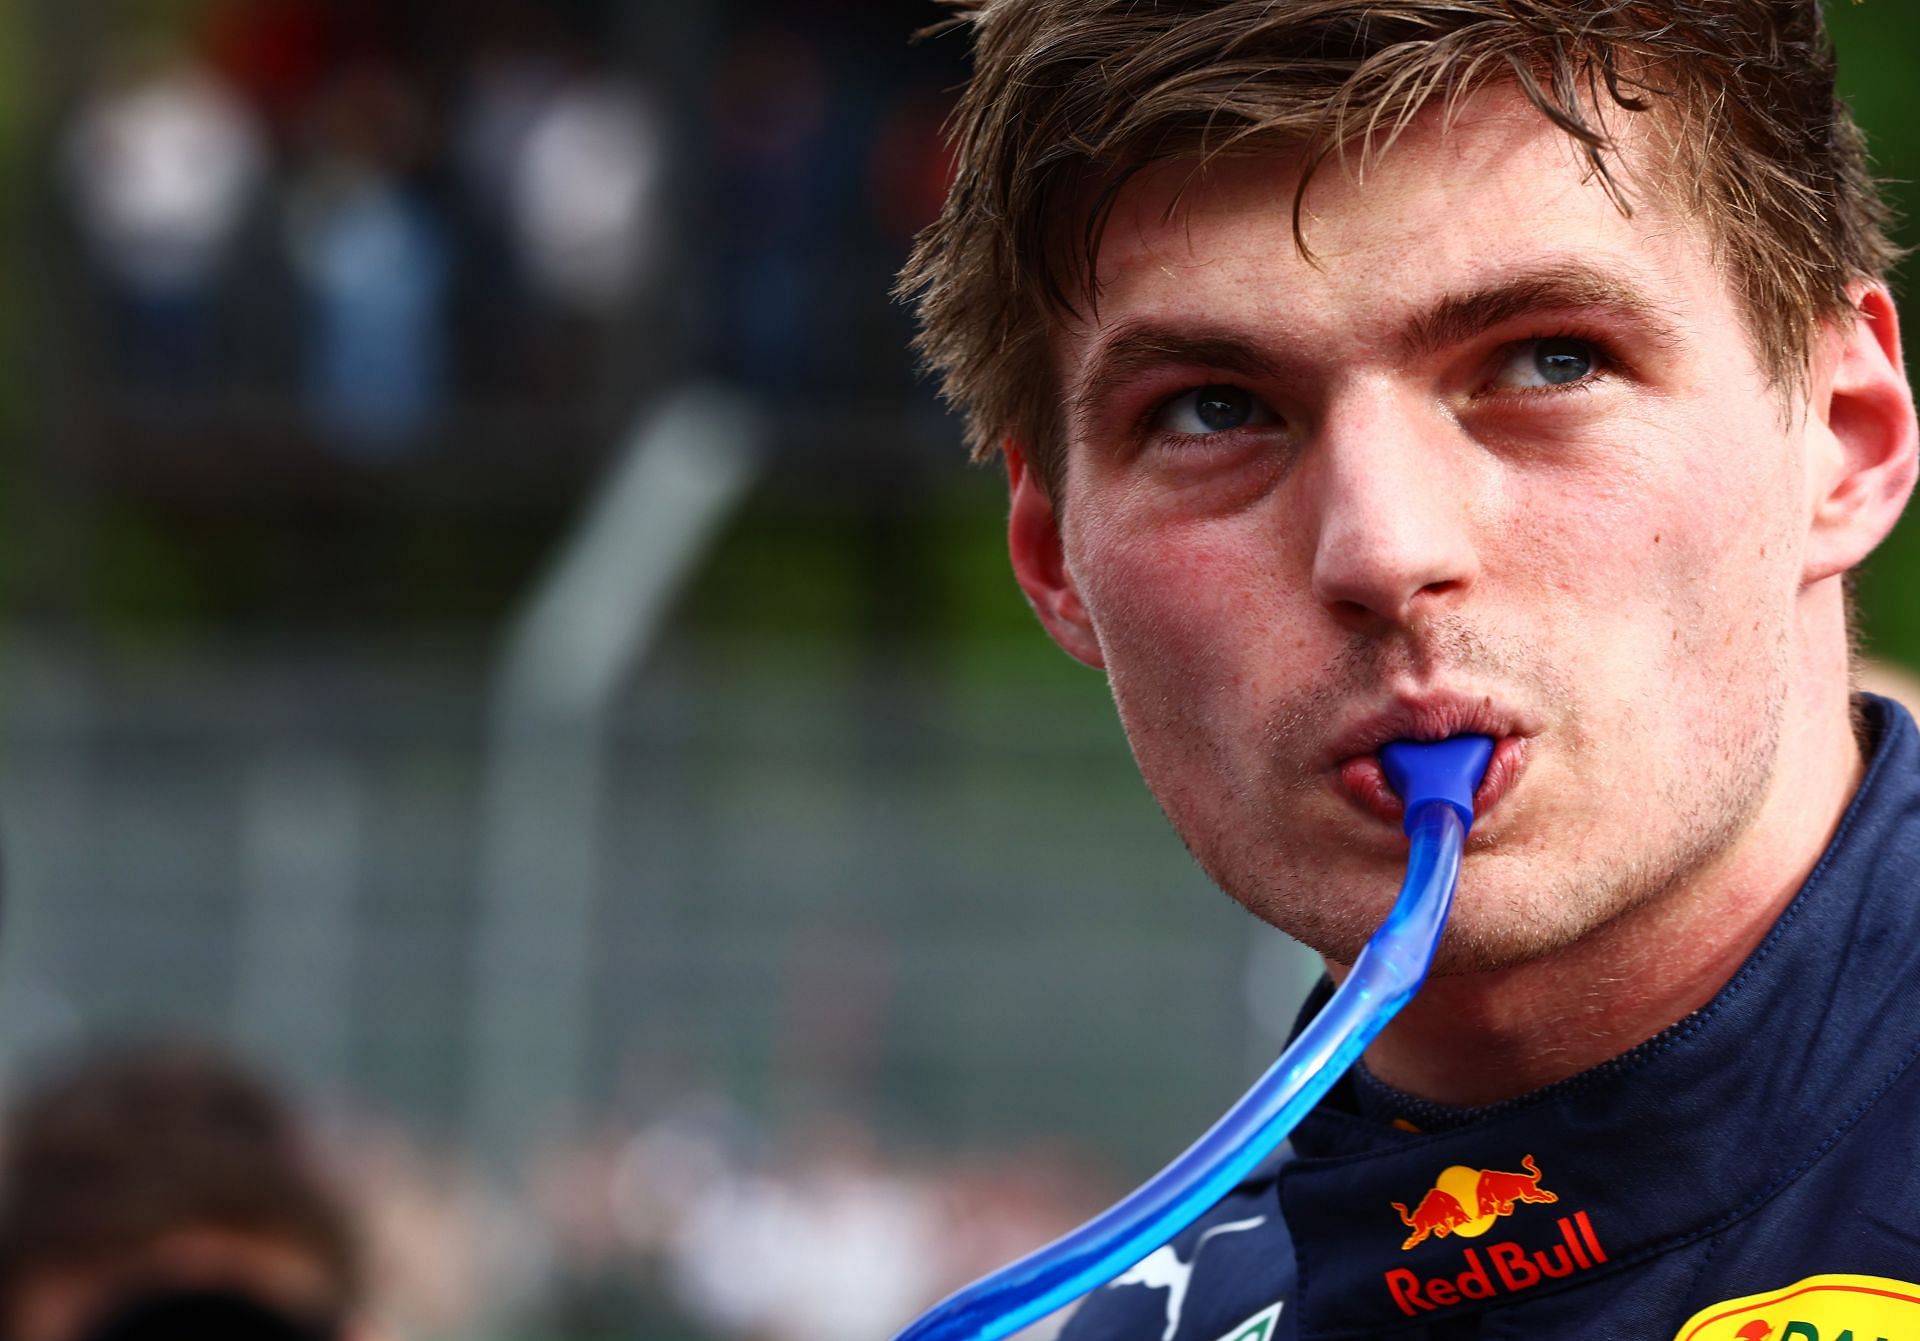 Sprint winner Max Verstappen in parc ferm&eacute; ahead of the F1 Grand Prix of Emilia Romagna (Photo by Mark Thompson/Getty Images)